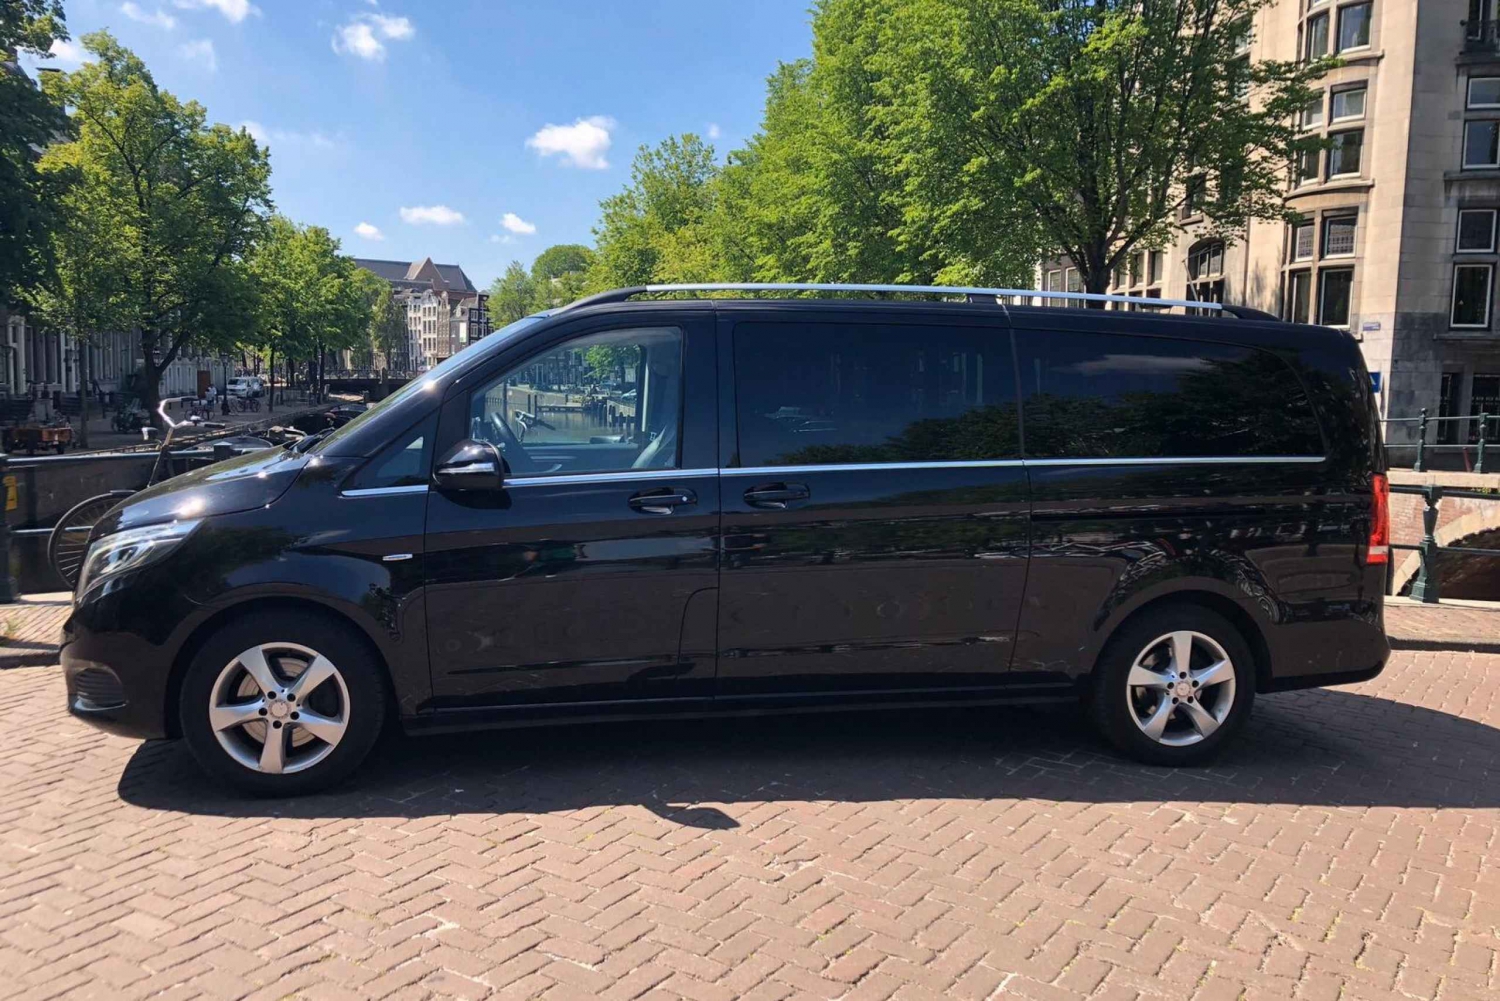 From The Hague: One-Way Private Transfer to Schiphol Airport